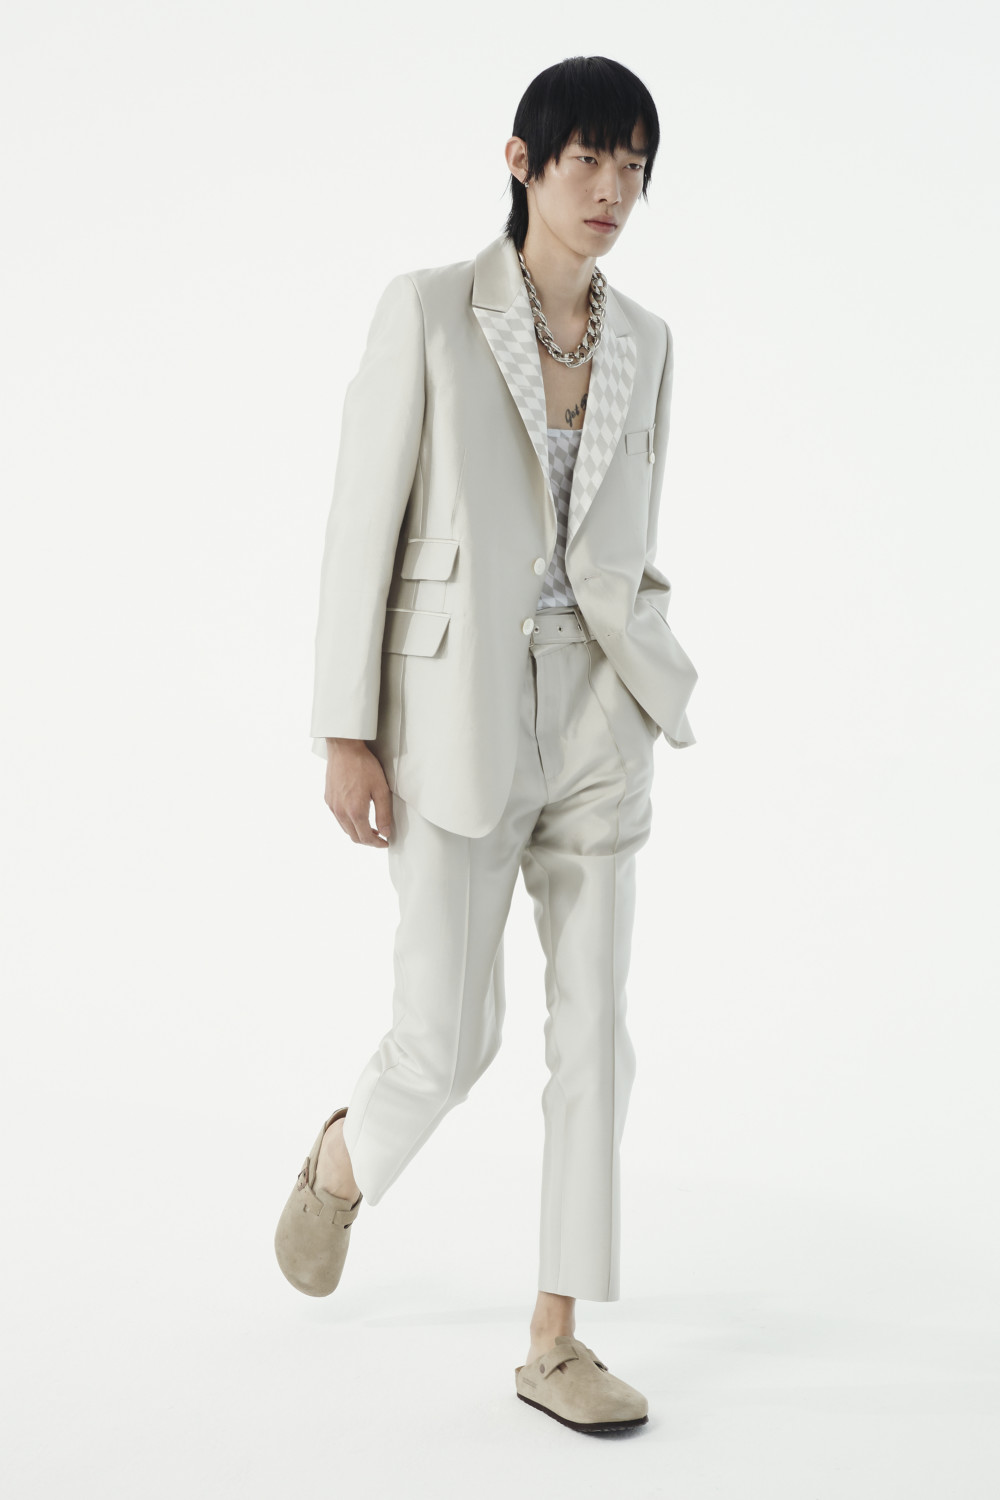 Private Policy Women Men Spring Summer 2021 New York